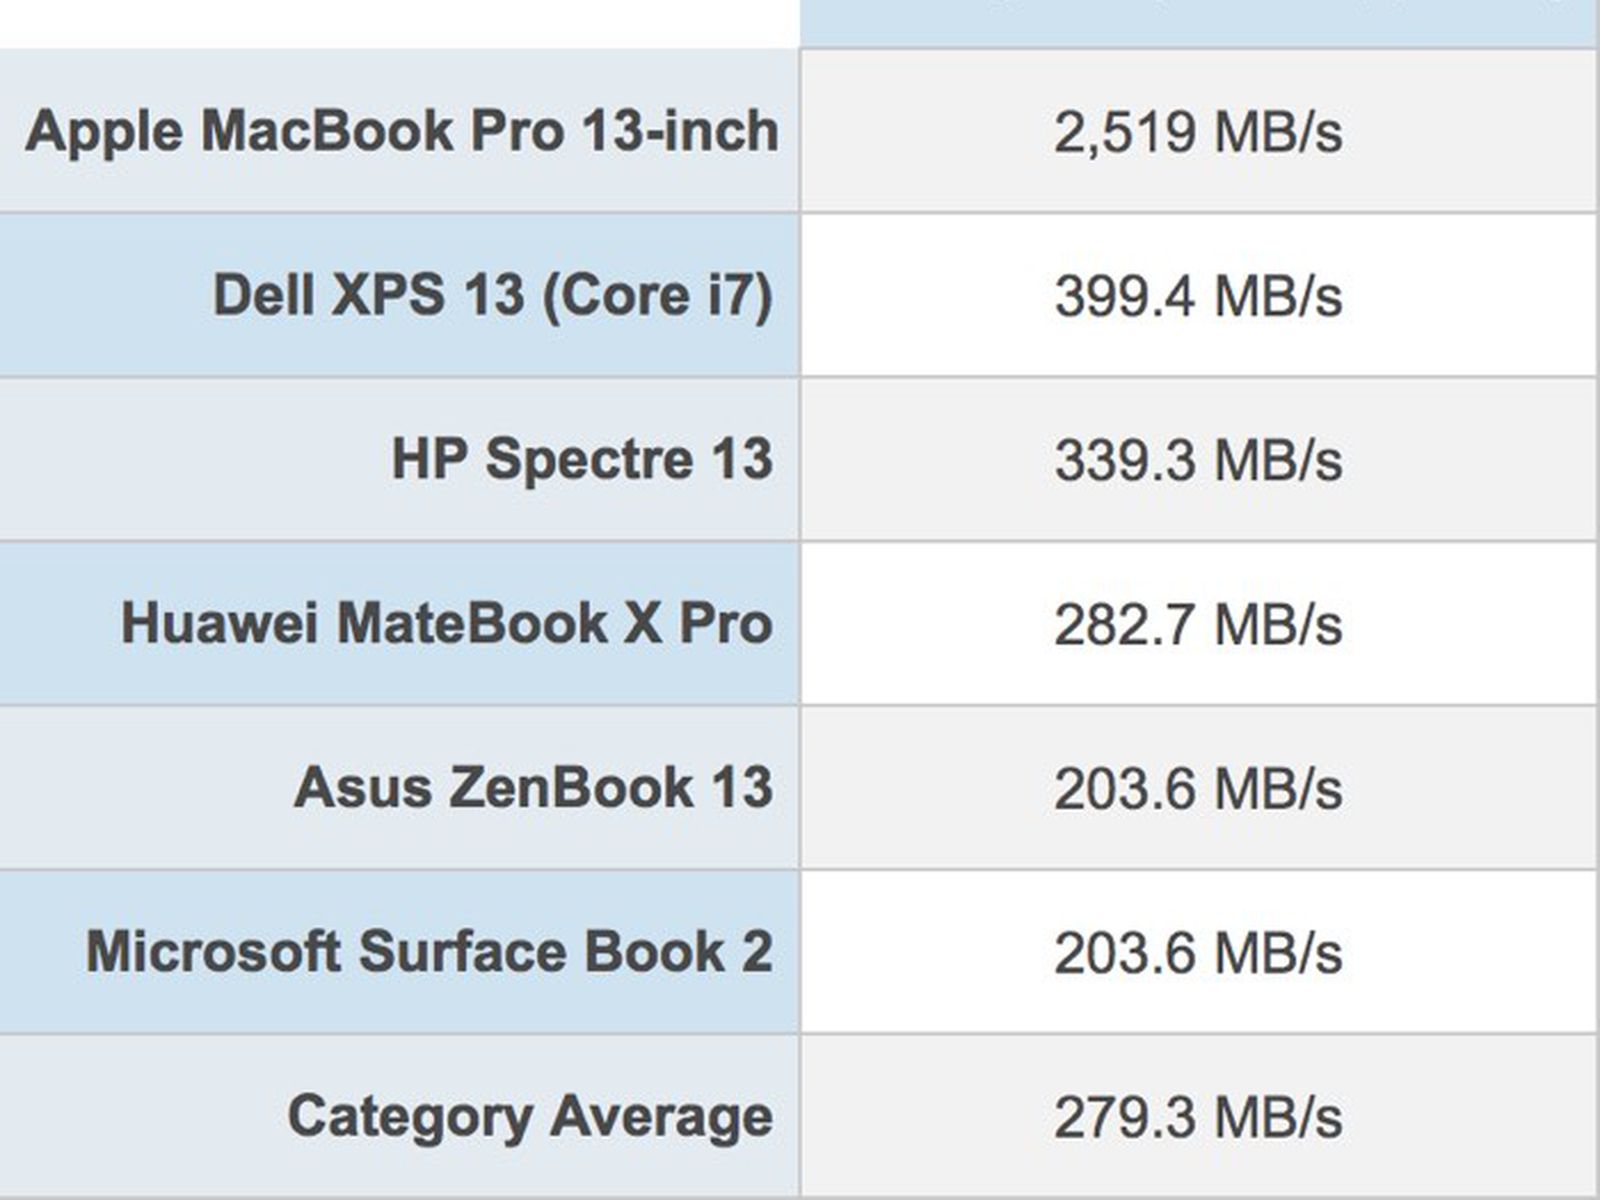 Cleanly latch merchant 2018 MacBook Pro Features 'Fastest SSD Ever' in a Laptop According to  Benchmarks - MacRumors